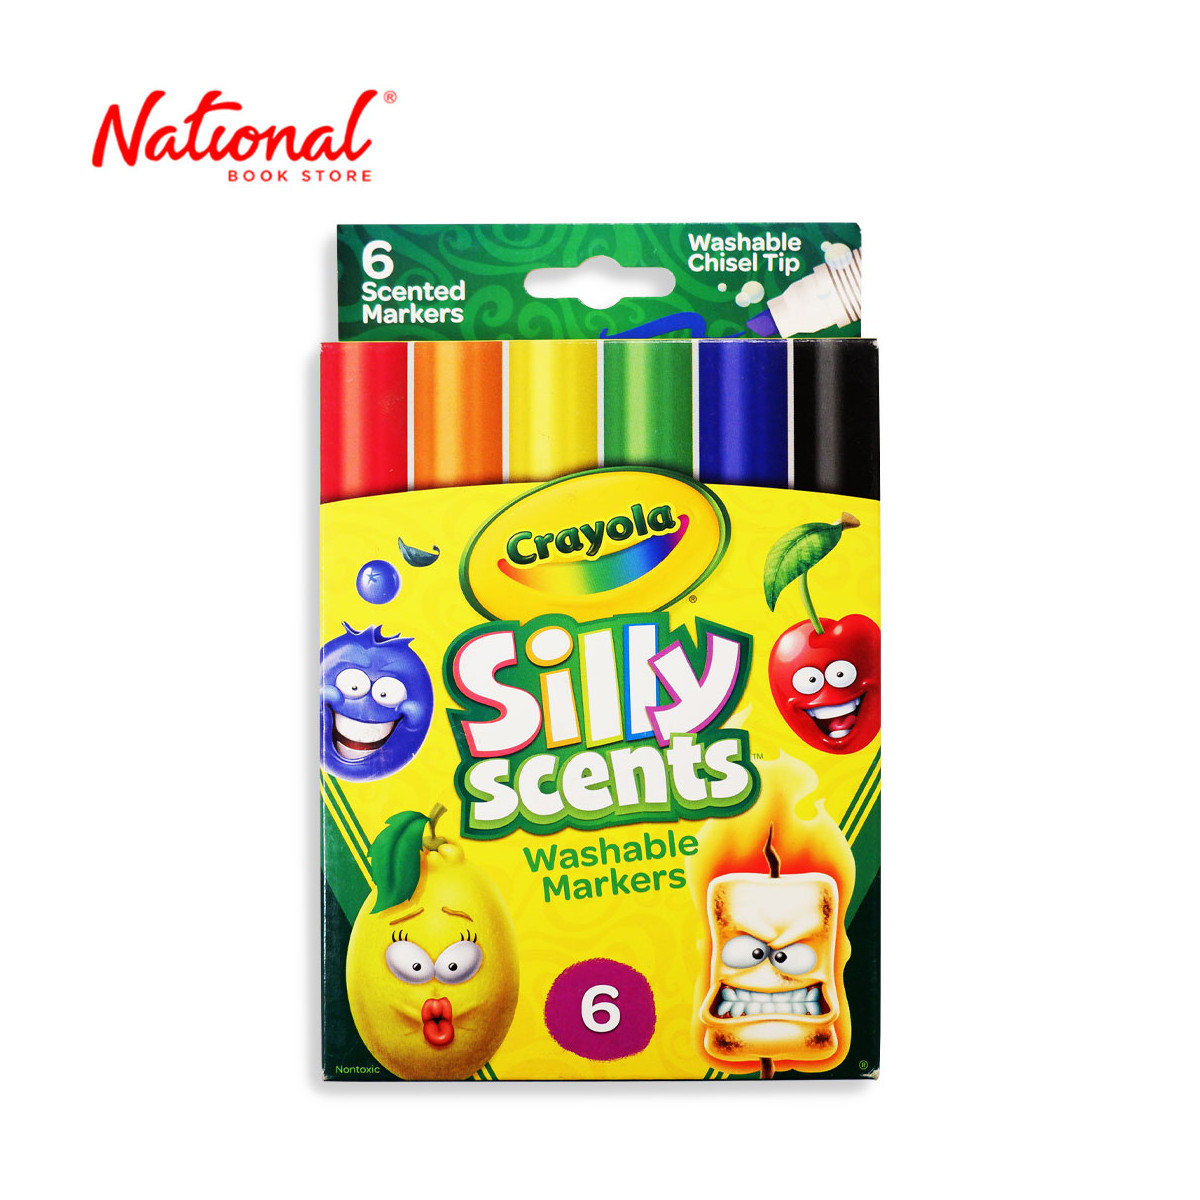 Crayola Silly Scents Washable Marker Set Of 6 588197 Chisel Tip - Arts & Crafts Supplies